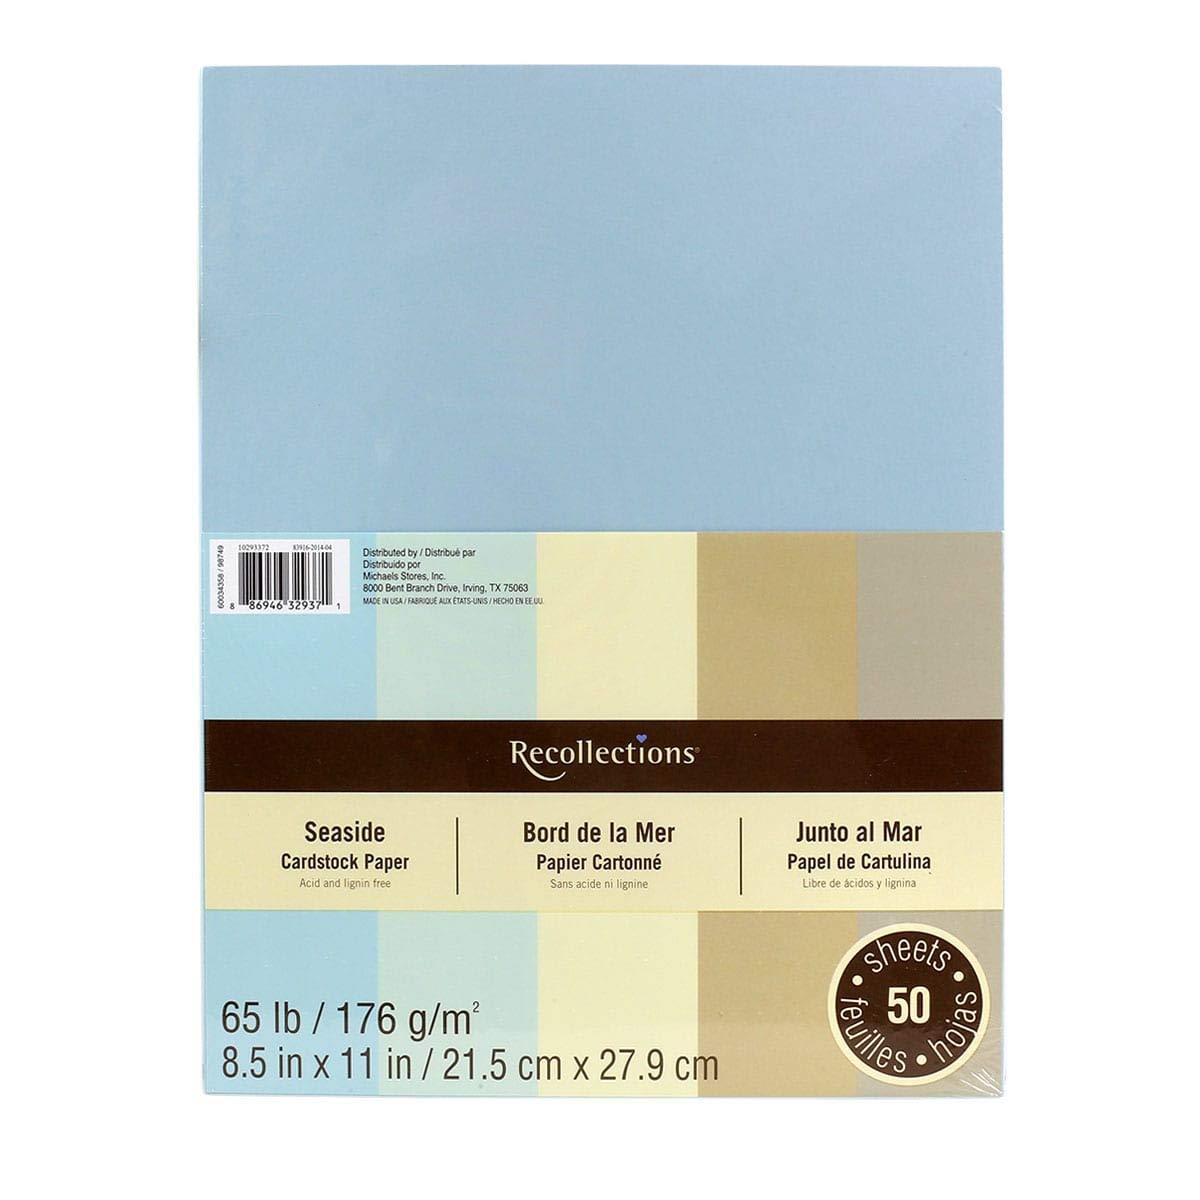 Recollections Cardstock Paper, Seaside Colors 8 1/2 x 11 (100)